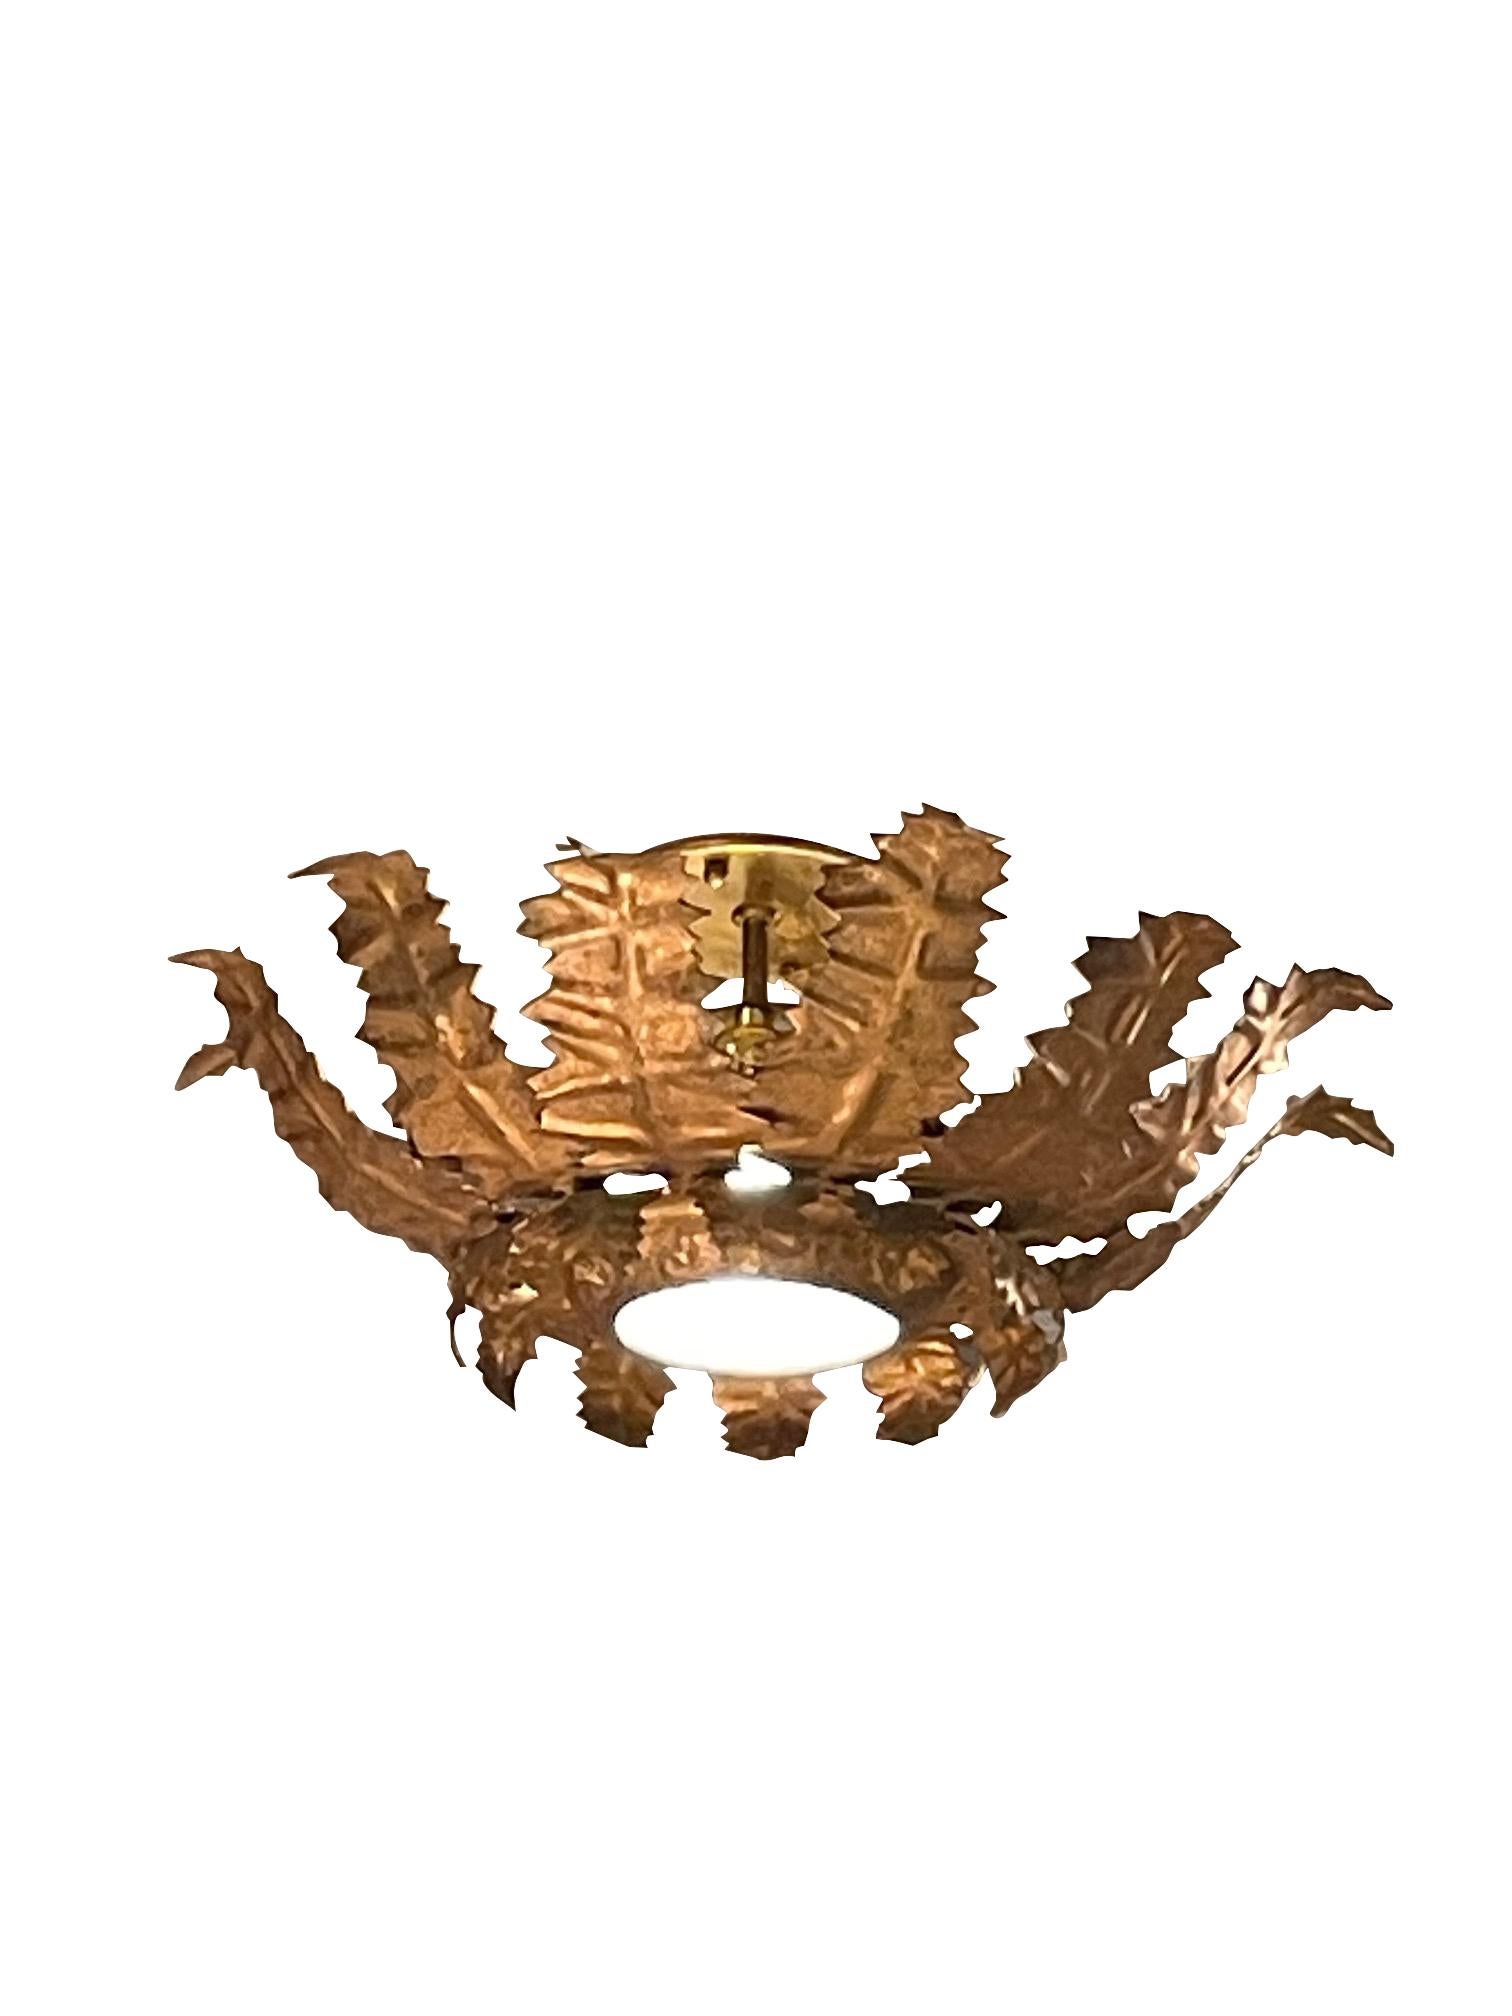 1940's Spanish gold gilt metal sunburst design ceiling mount chandelier.
Glass center piece.
Newly rewired and UL listed.
Single candelabra bulb.
Two available and sold individually.